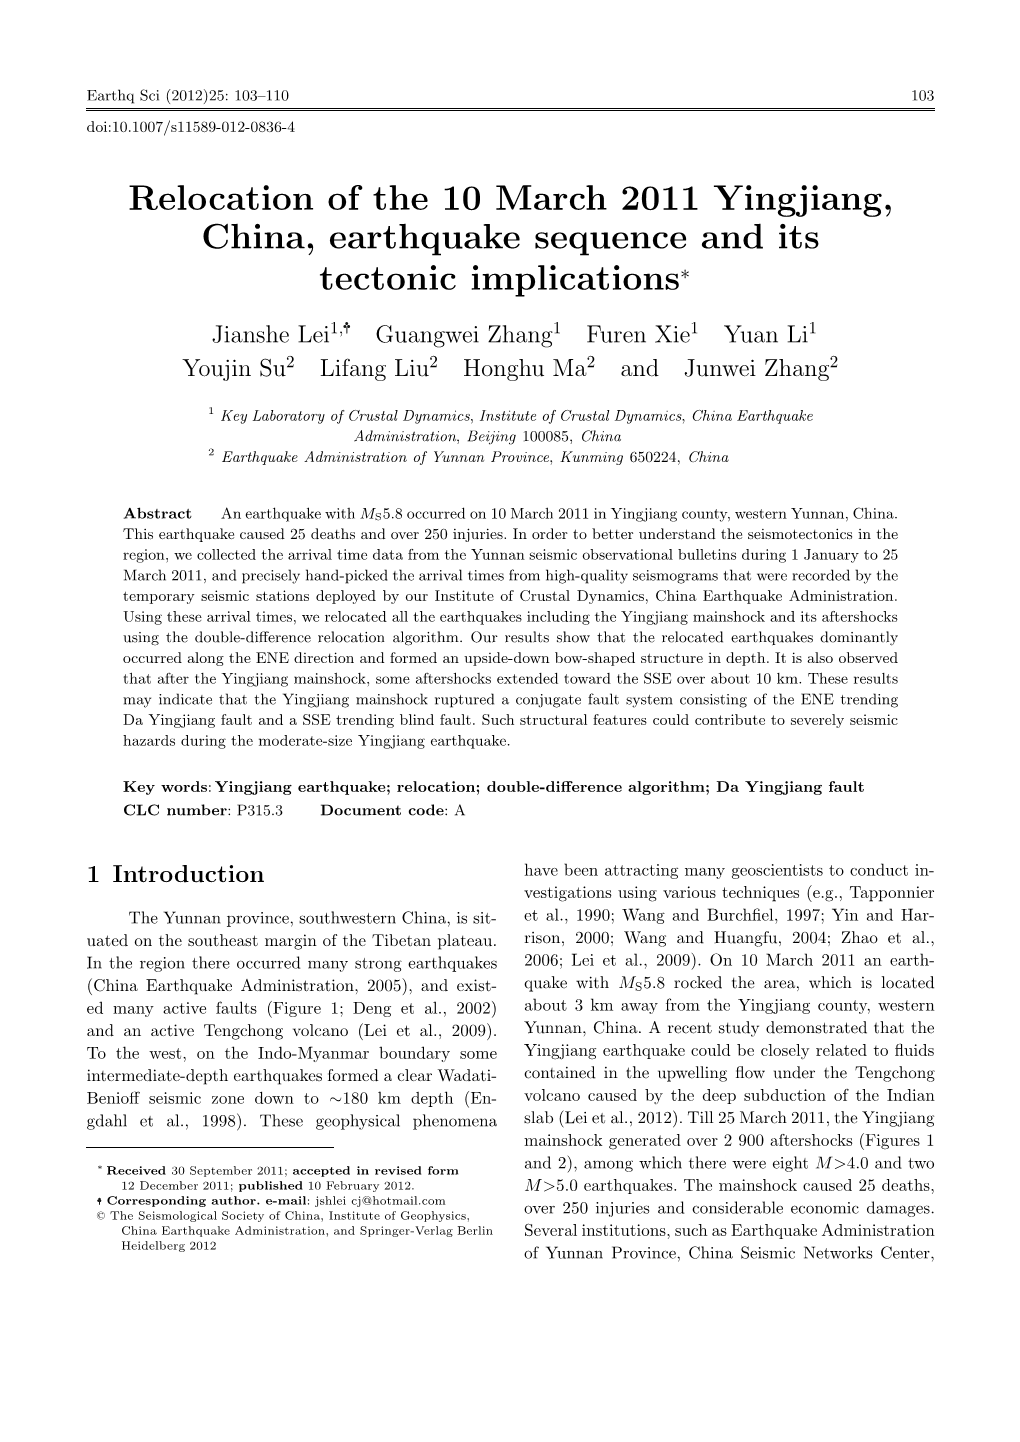 Relocation of the 10 March 2011 Yingjiang, China, Earthquake Sequence and Its Tectonic Implications∗